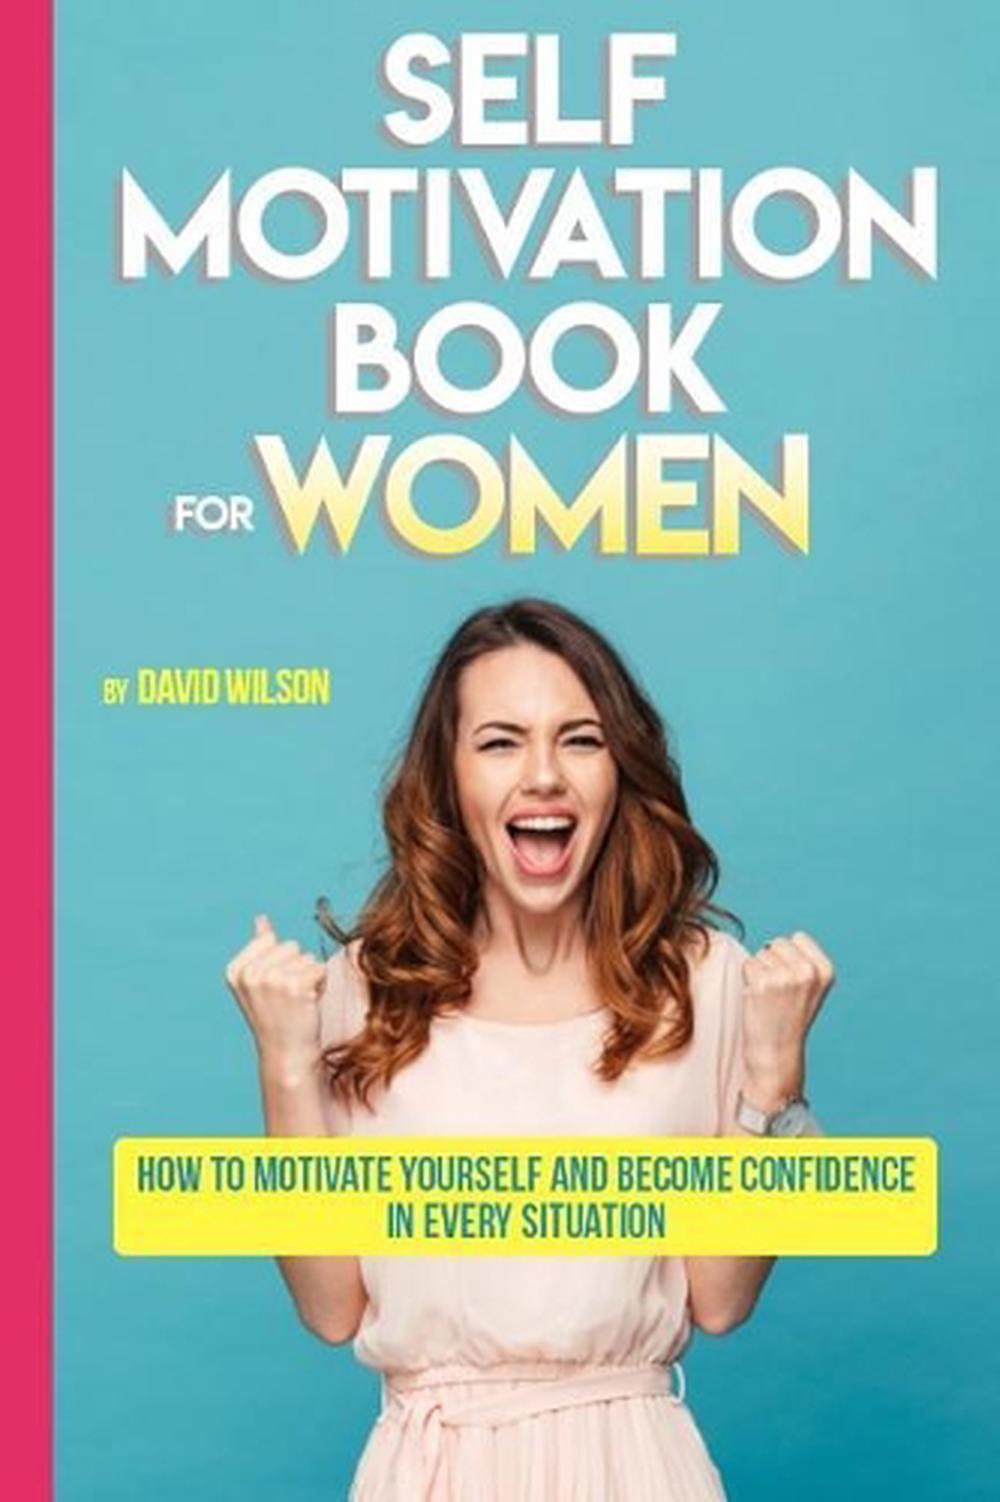 Self Motivation Book for Women: How to Motivate Yourself and Become